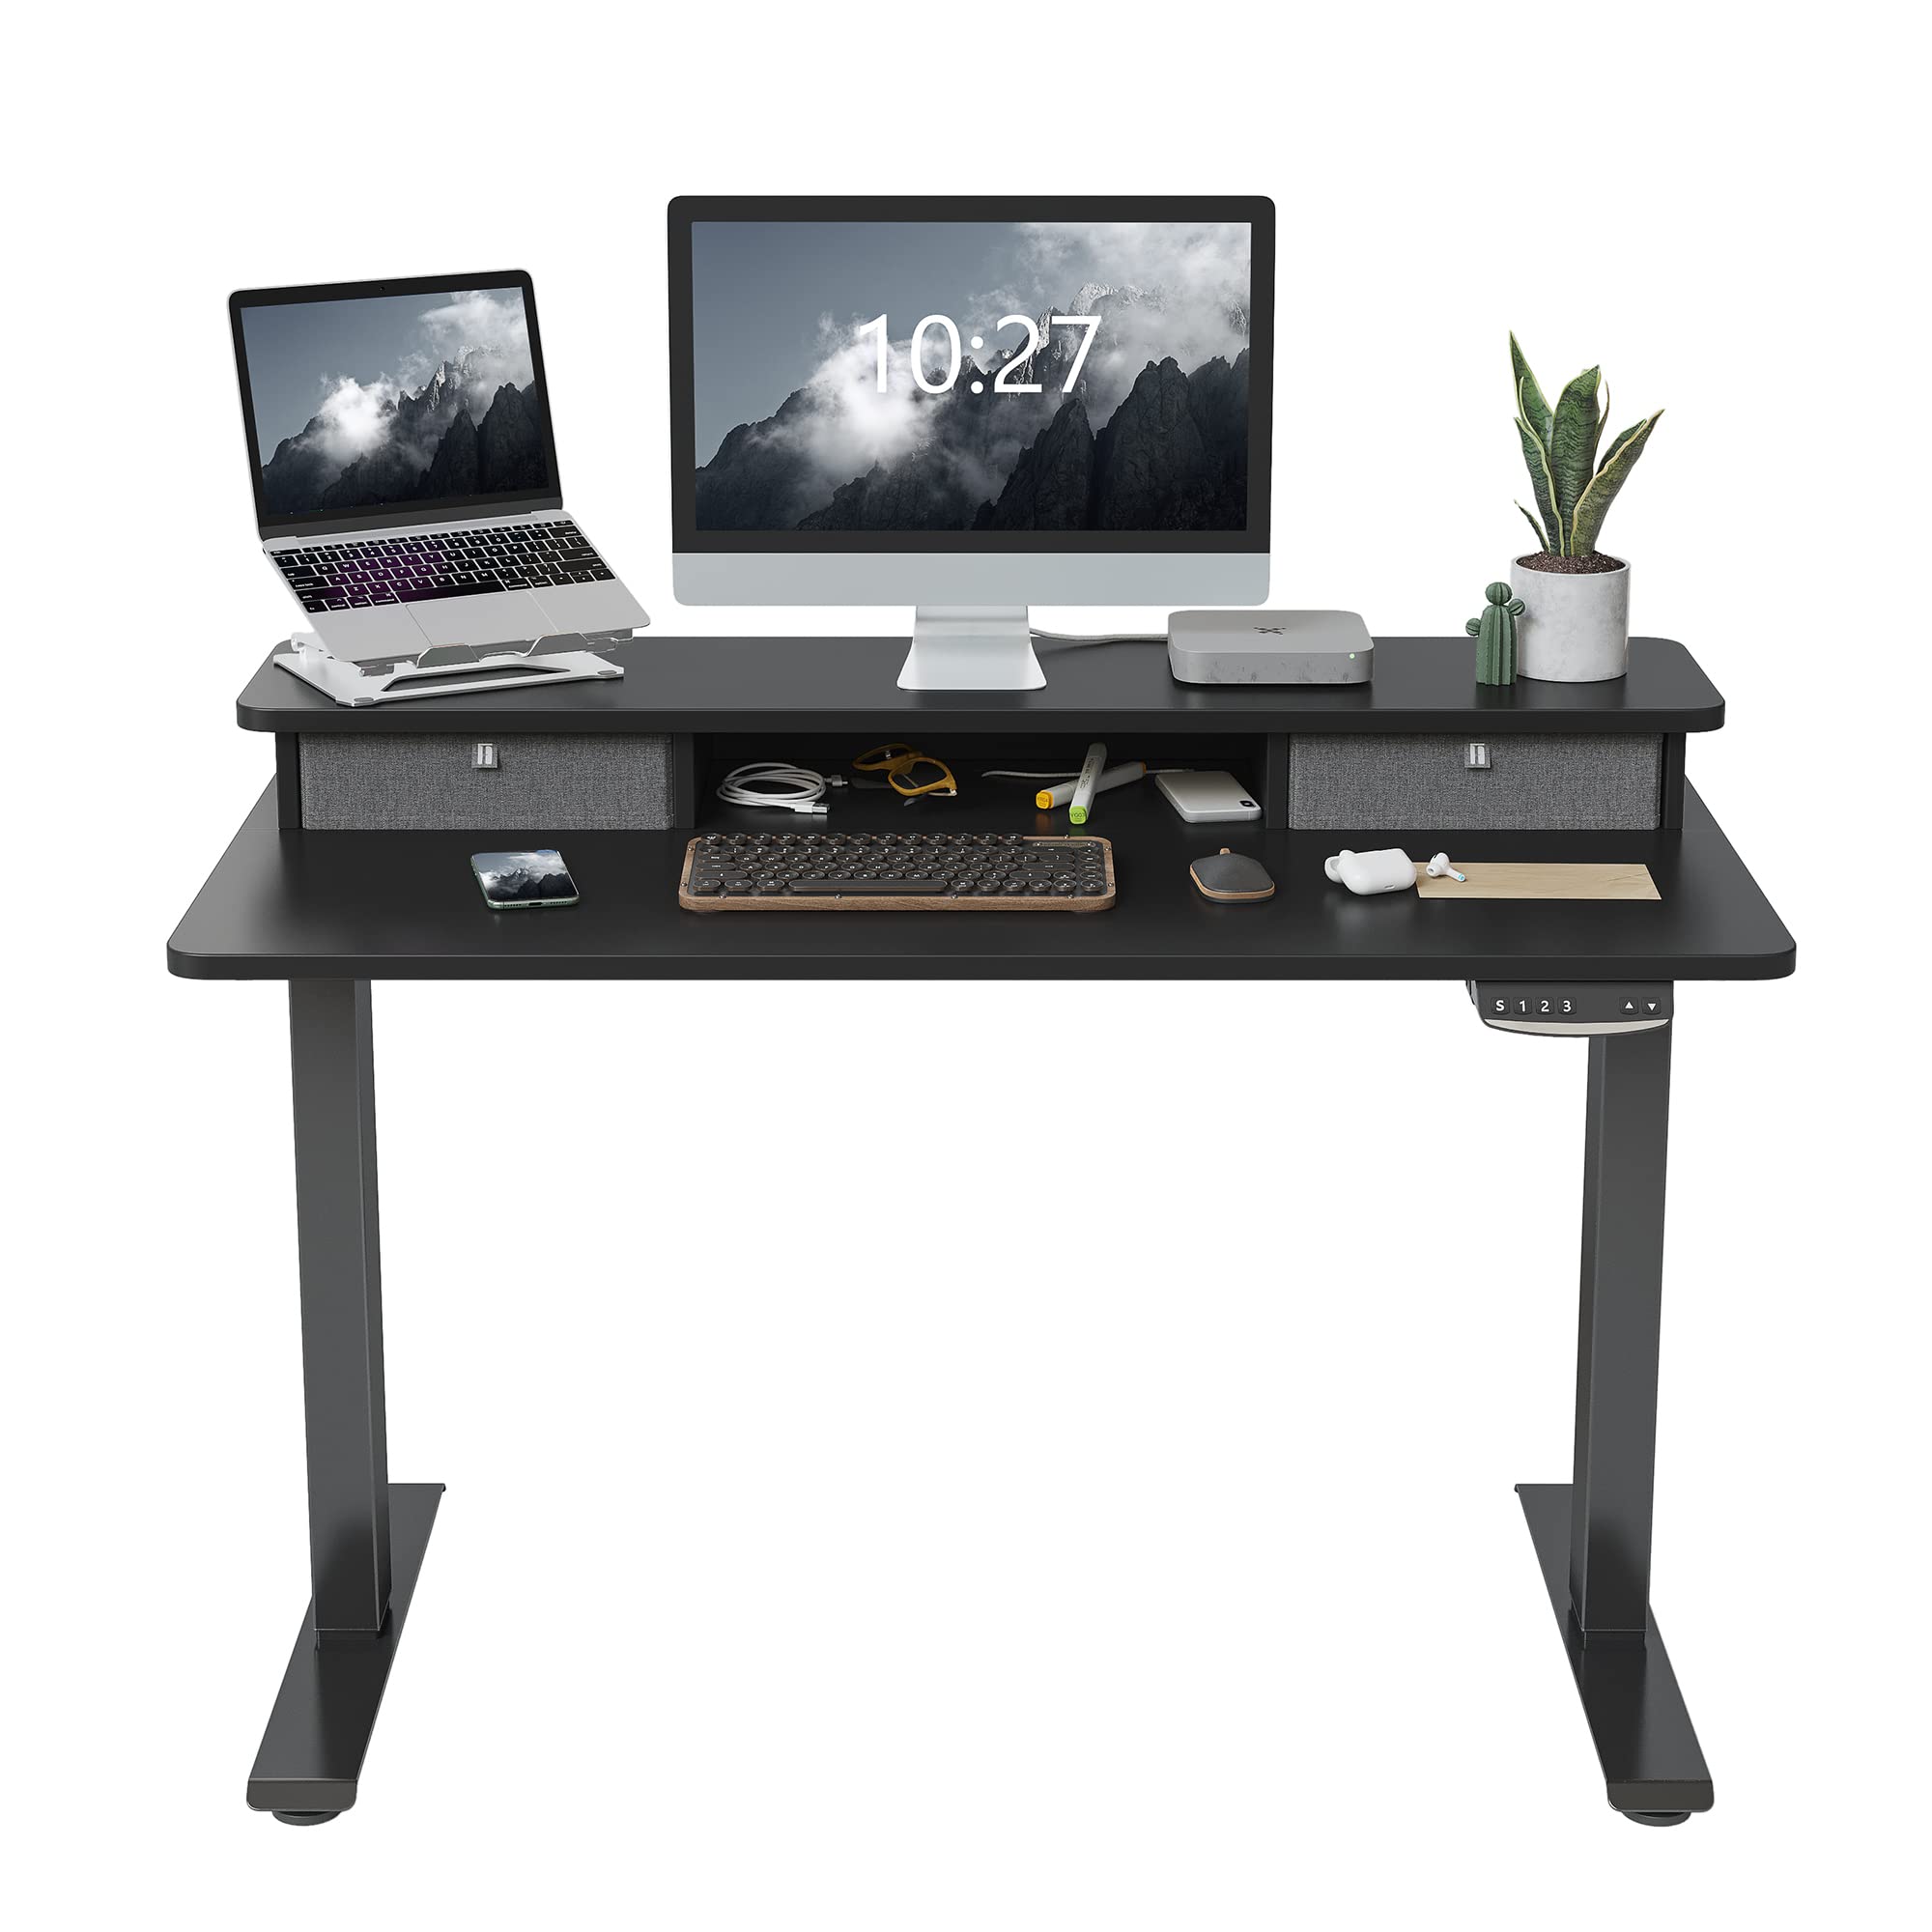 FEZIBO Height Adjustable Electric Standing Desk with Double Drawer, Table with Storage Shelf, Sit Stand Desk with Splice Board